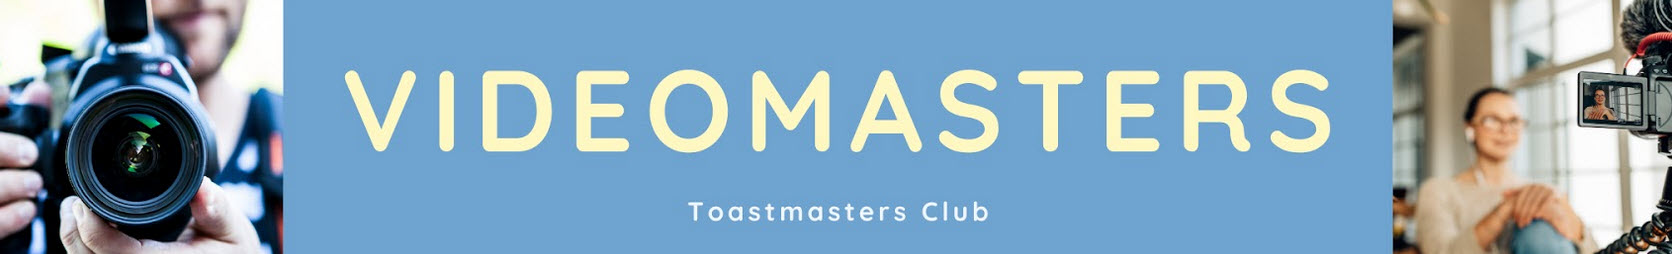 Check out Videomasters at https://www.youtube.com/@VideoMastersTMClub/videos